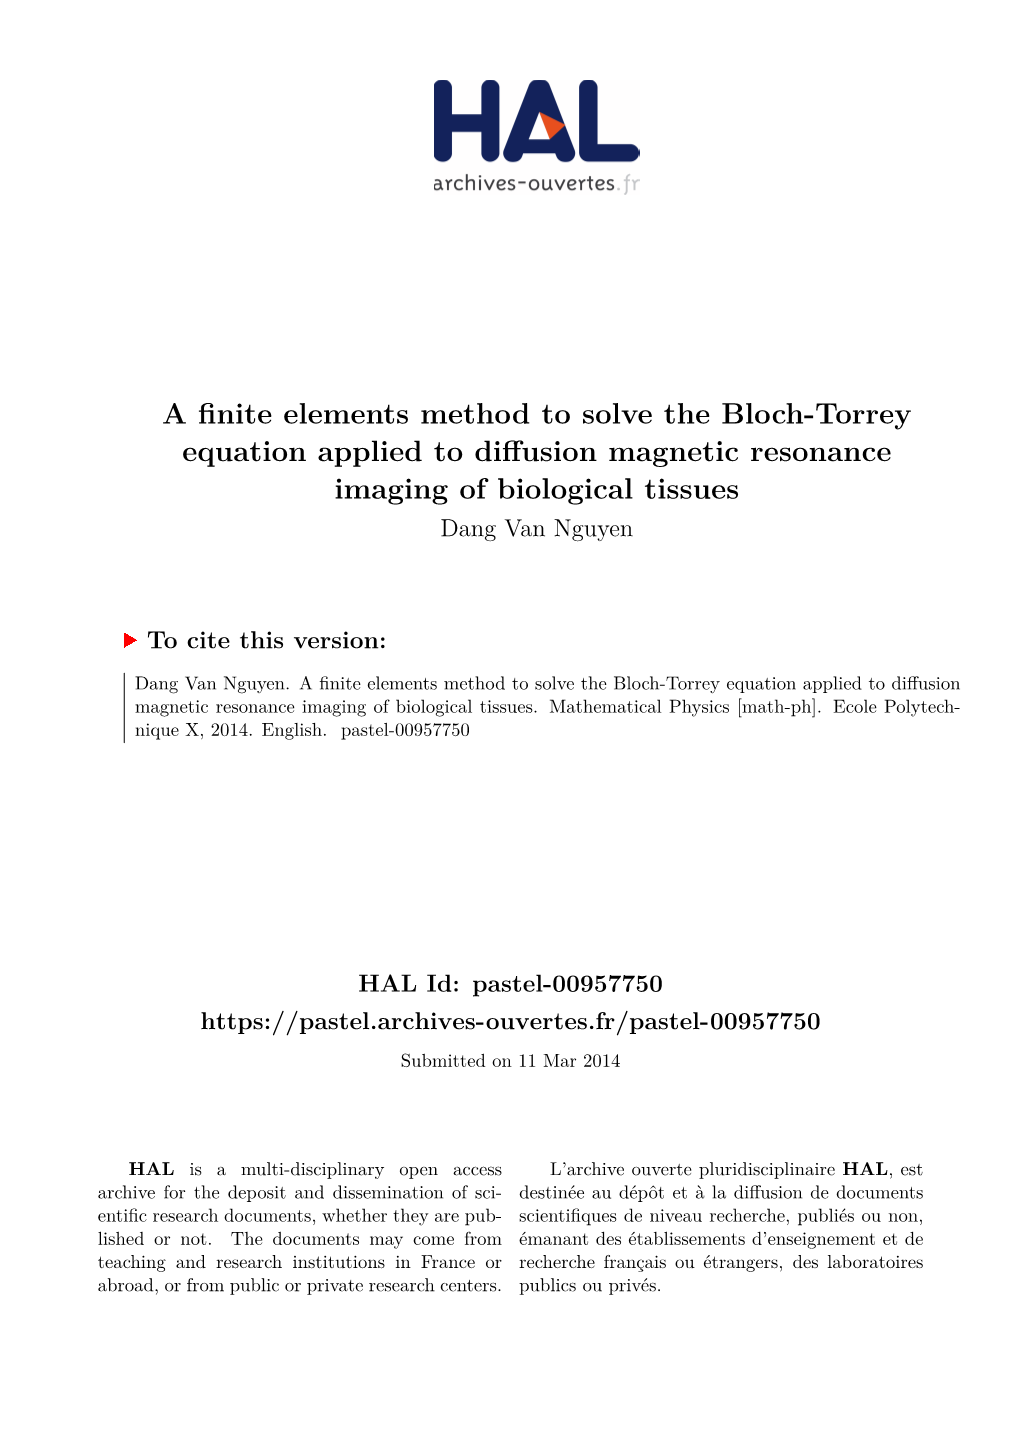 A Finite Elements Method to Solve the Bloch-Torrey Equation Applied to Diffusion Magnetic Resonance Imaging of Biological Tissues Dang Van Nguyen